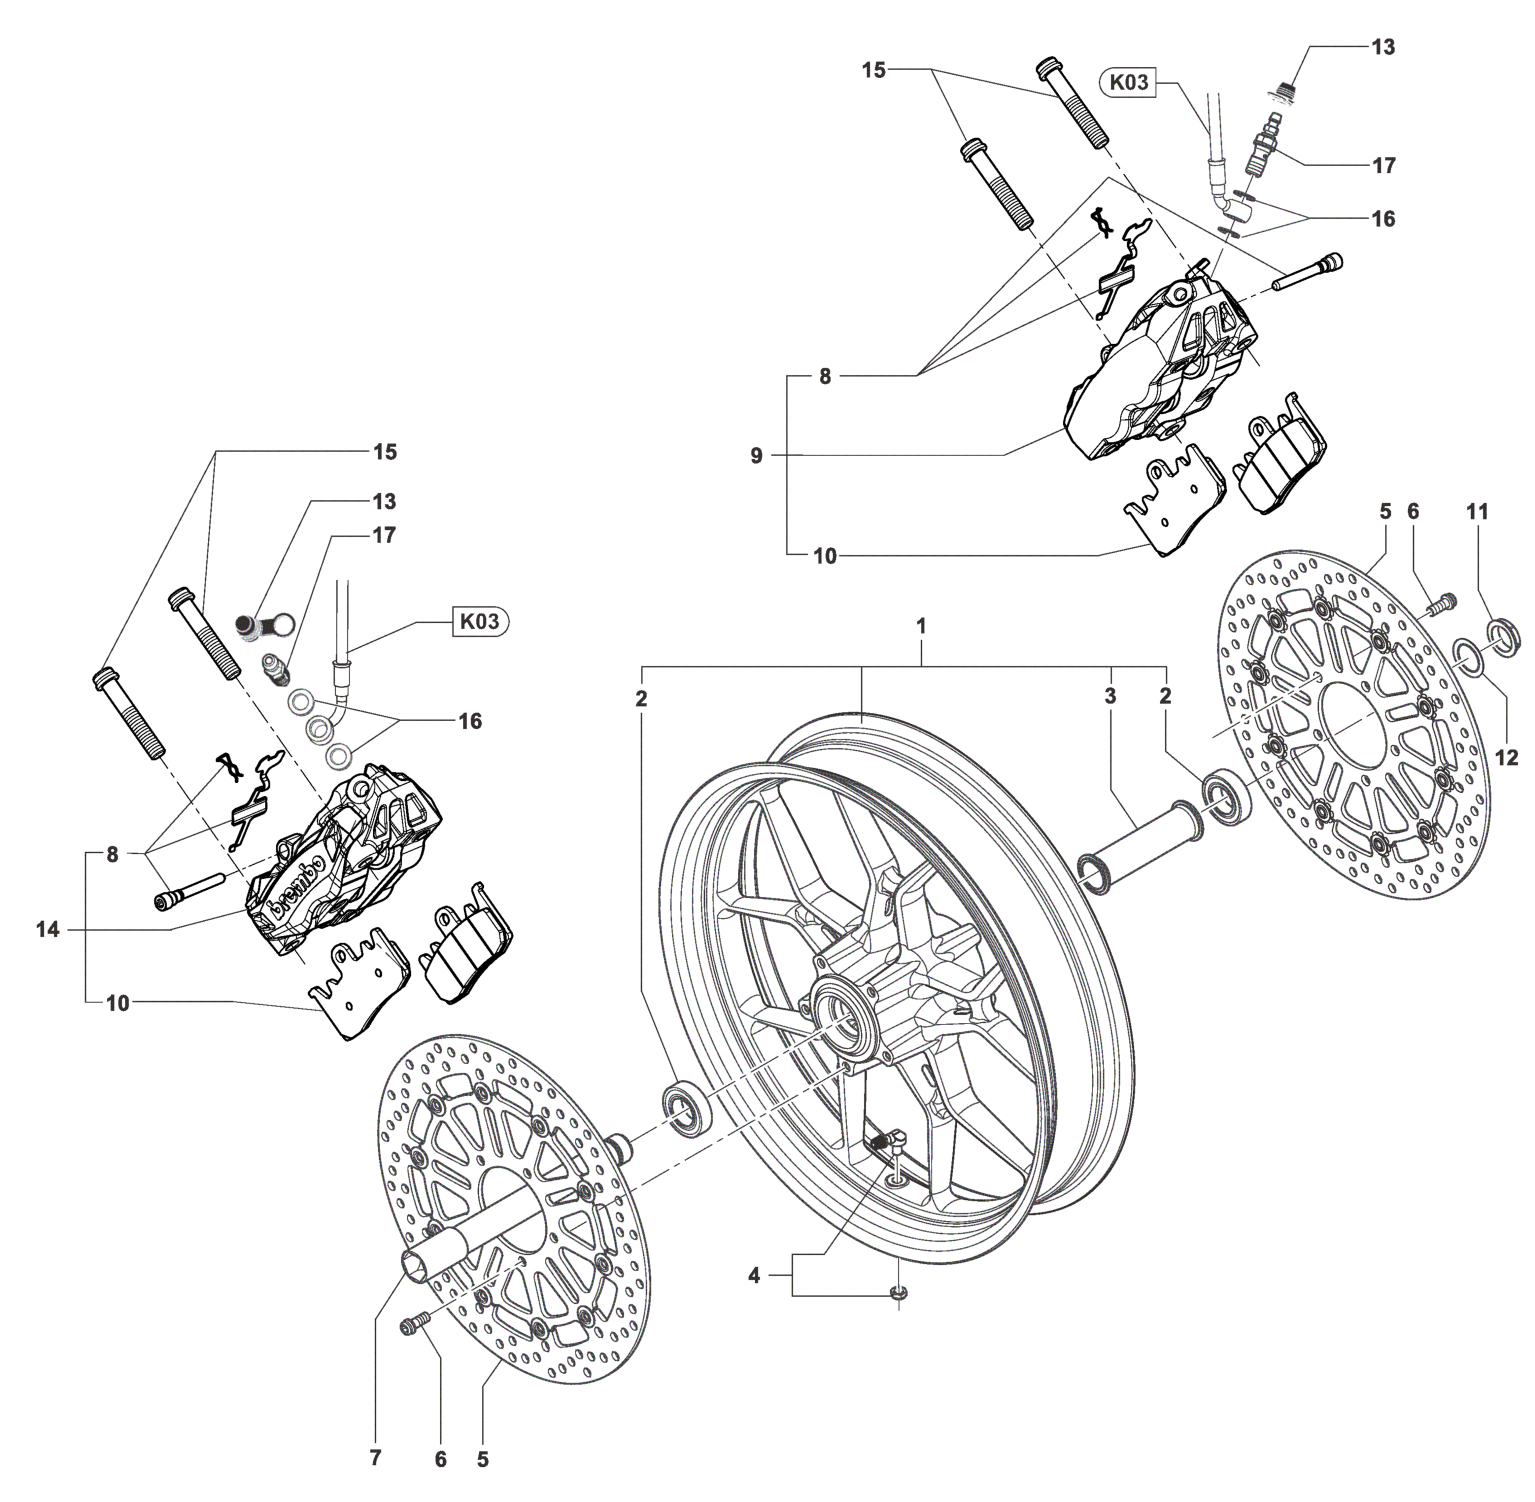 Front Wheel Assembly


